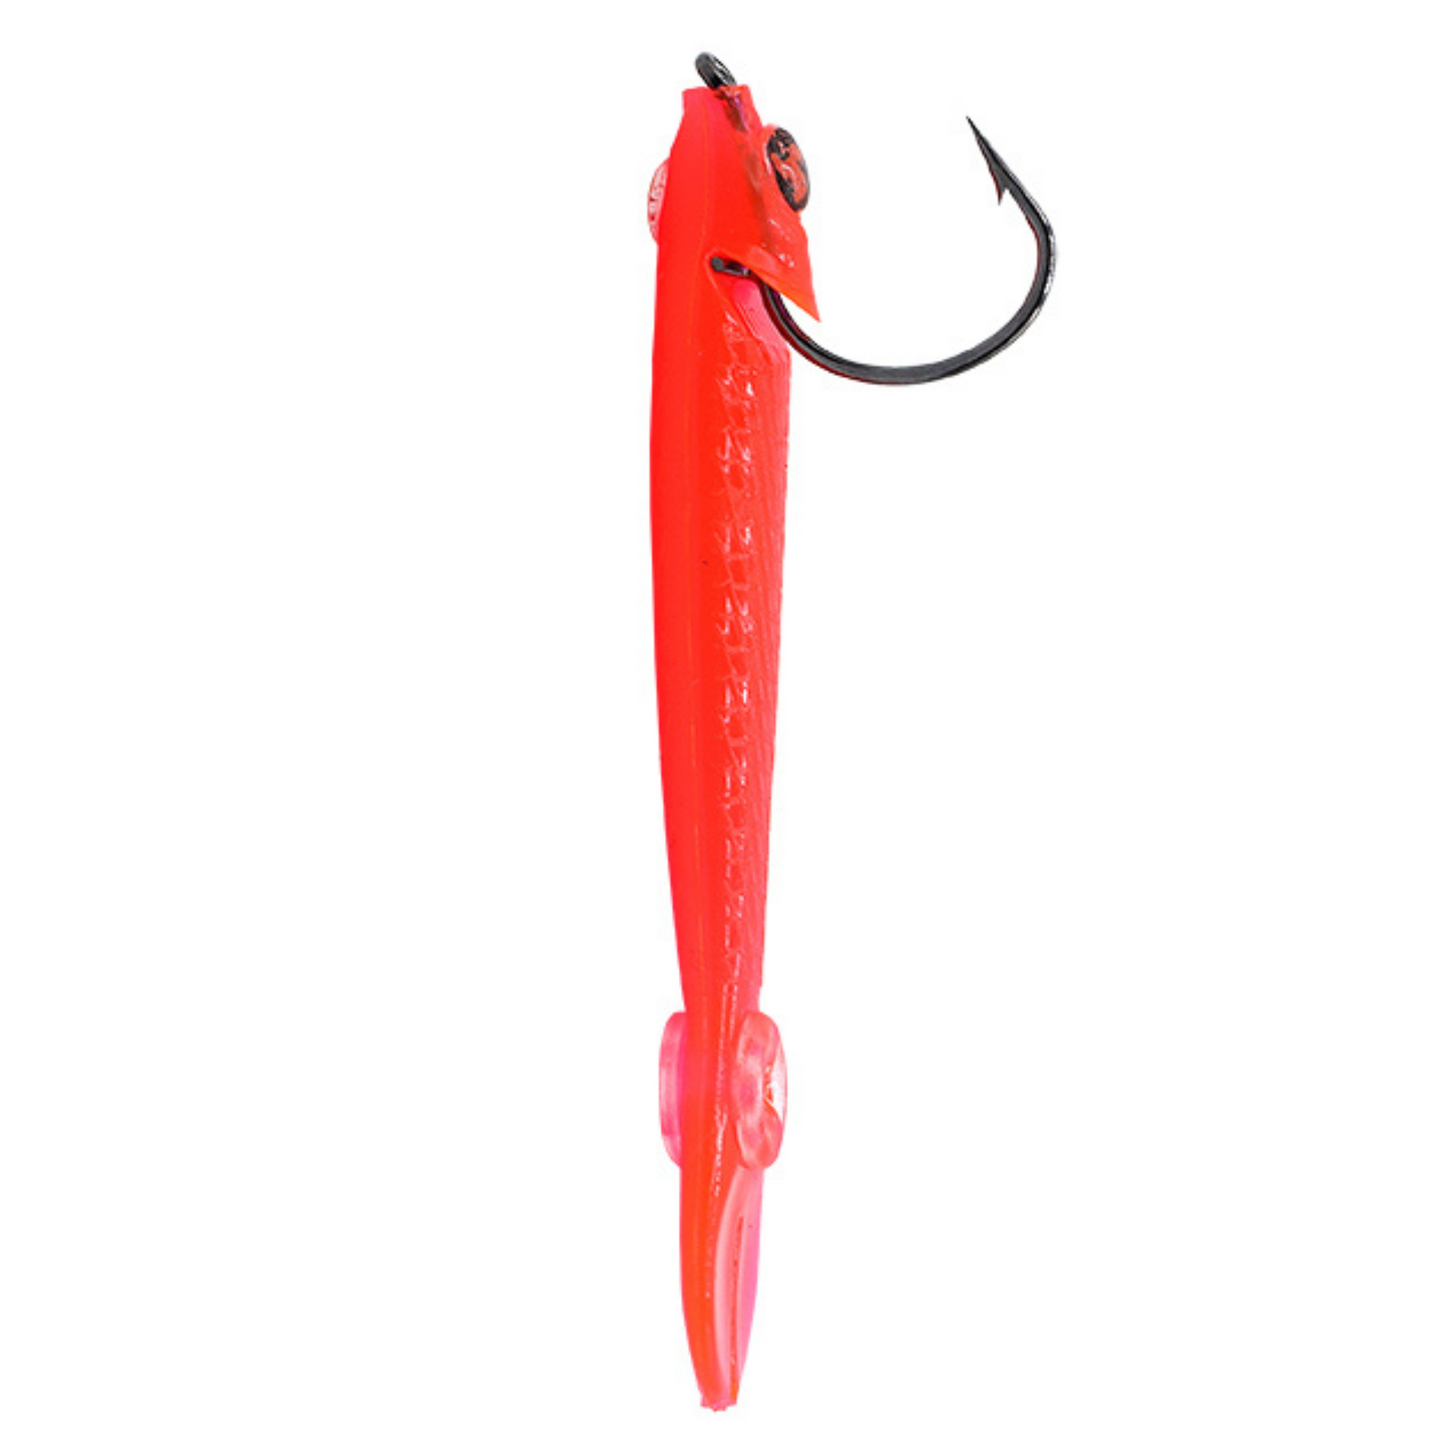 Lawless Lures Recoil Minnow 5.25 Bait